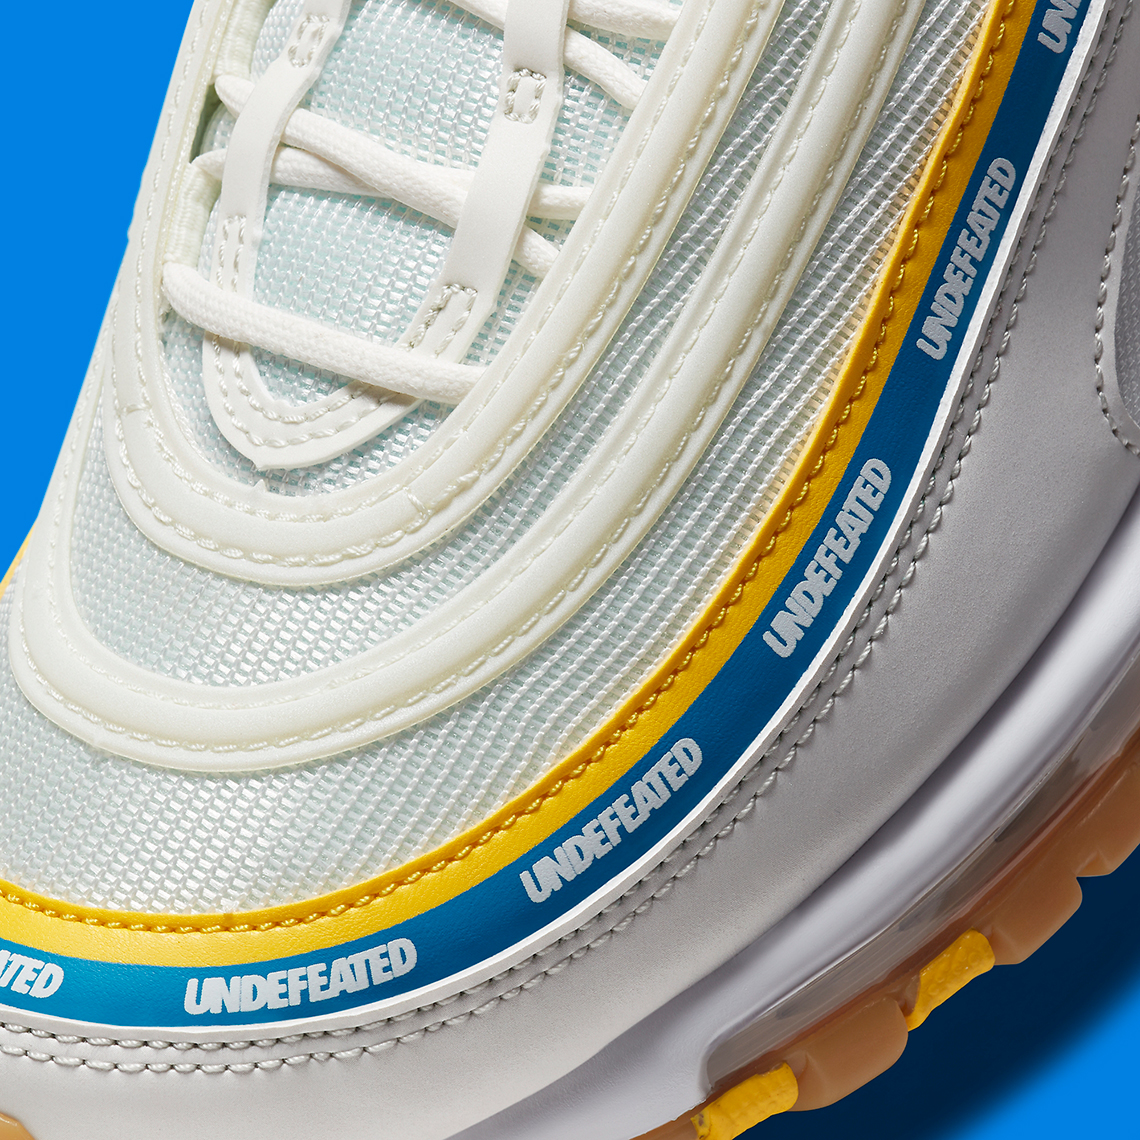 Nike Air Max 97 Undefeated Sail Aero Blue Midwest Gold Dc4830 100 5